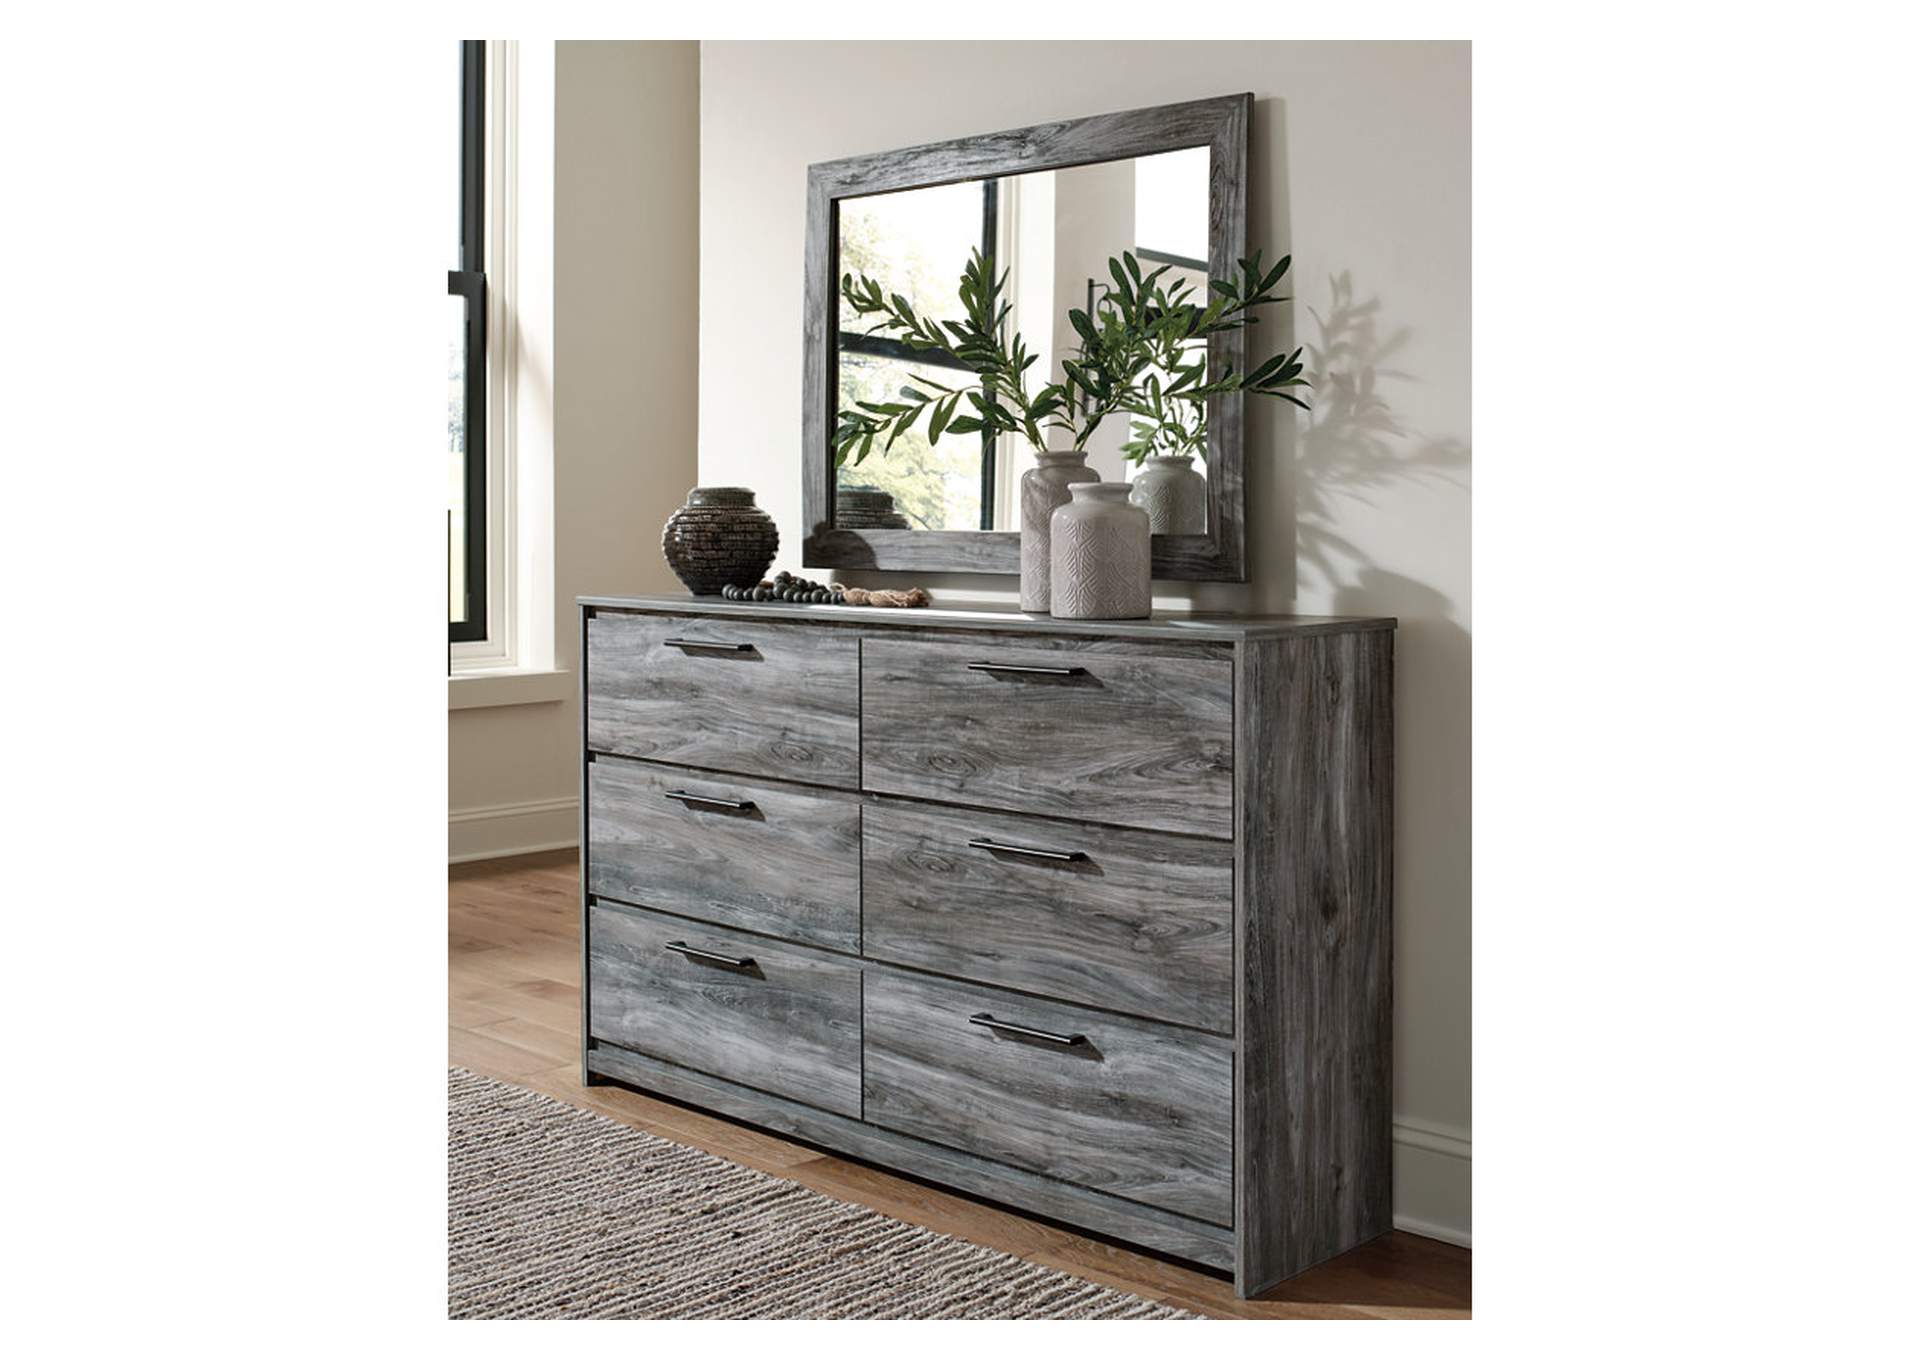 Baystorm King Panel Headboard with Mirrored Dresser, Chest and Nightstand,Signature Design By Ashley